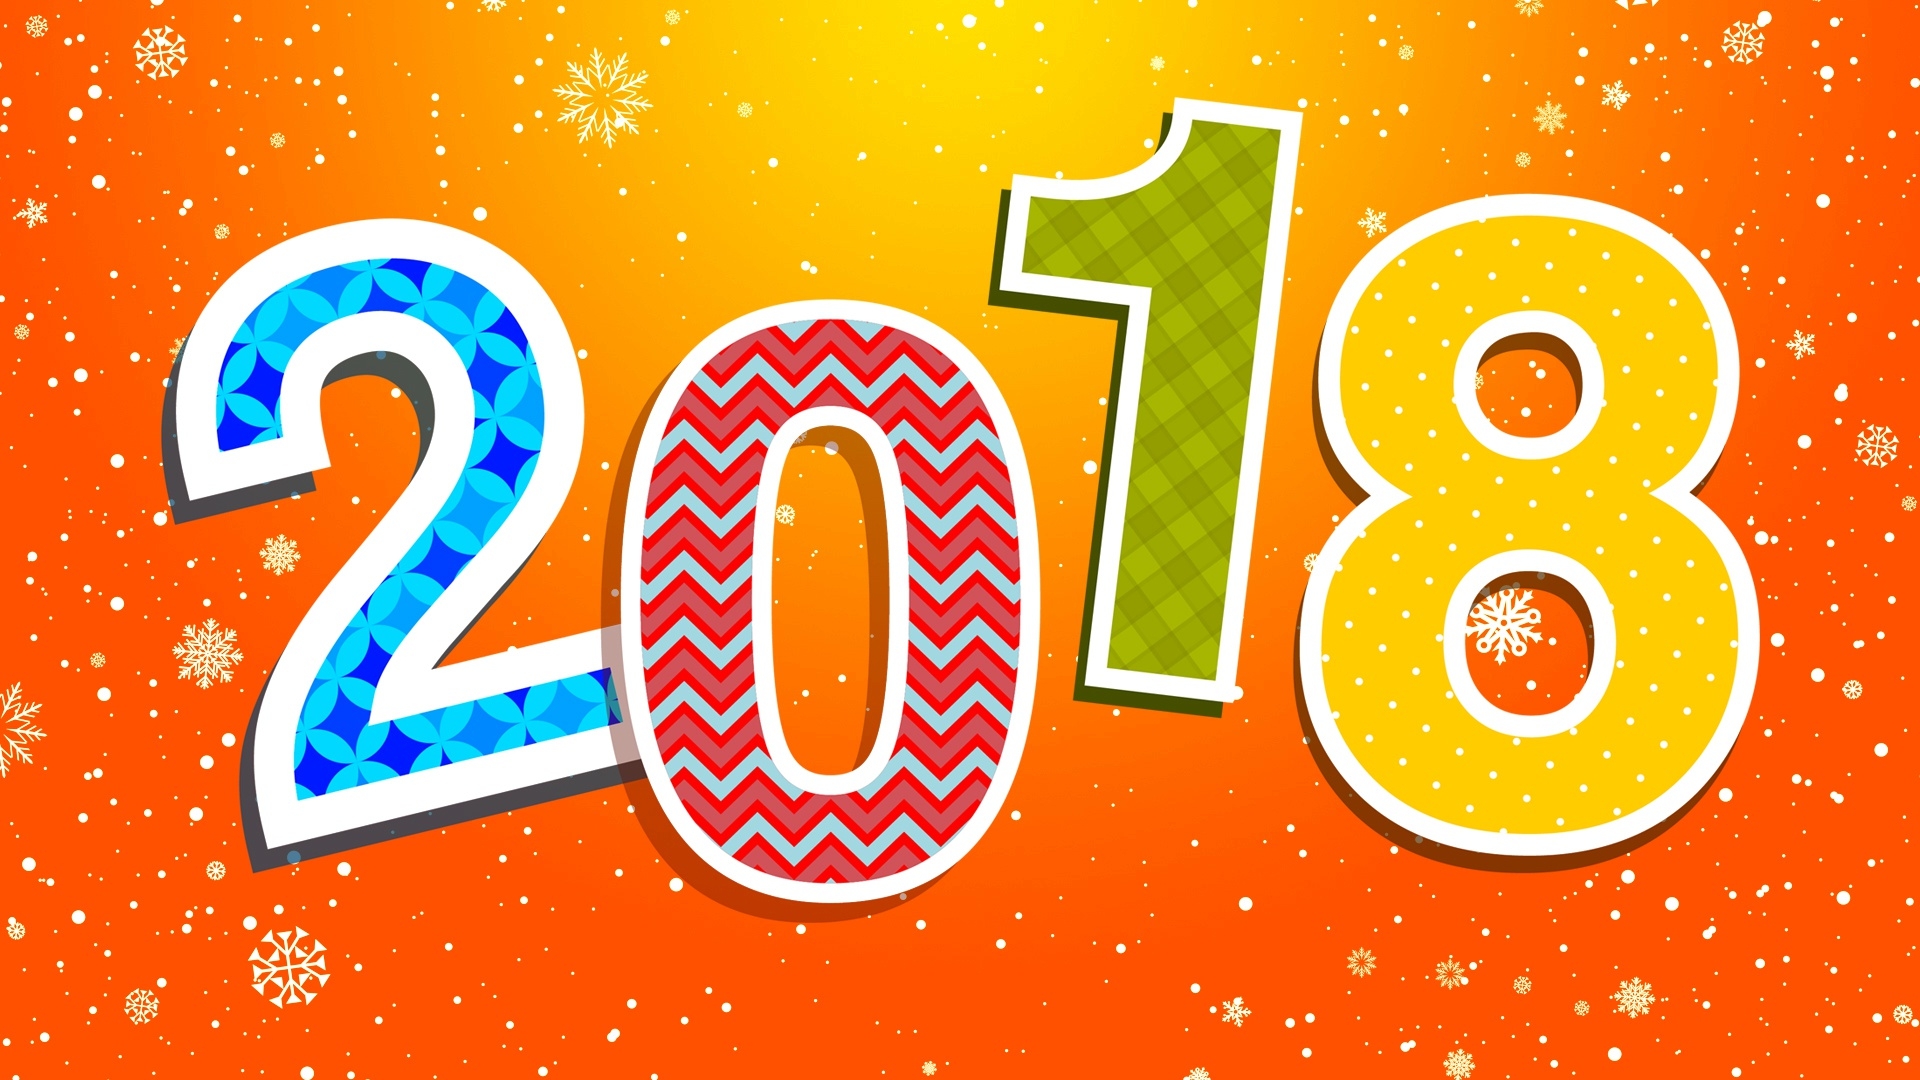 2018 Colorful New Year Hd Background-1920x1080 - New Year 2018 Background - HD Wallpaper 